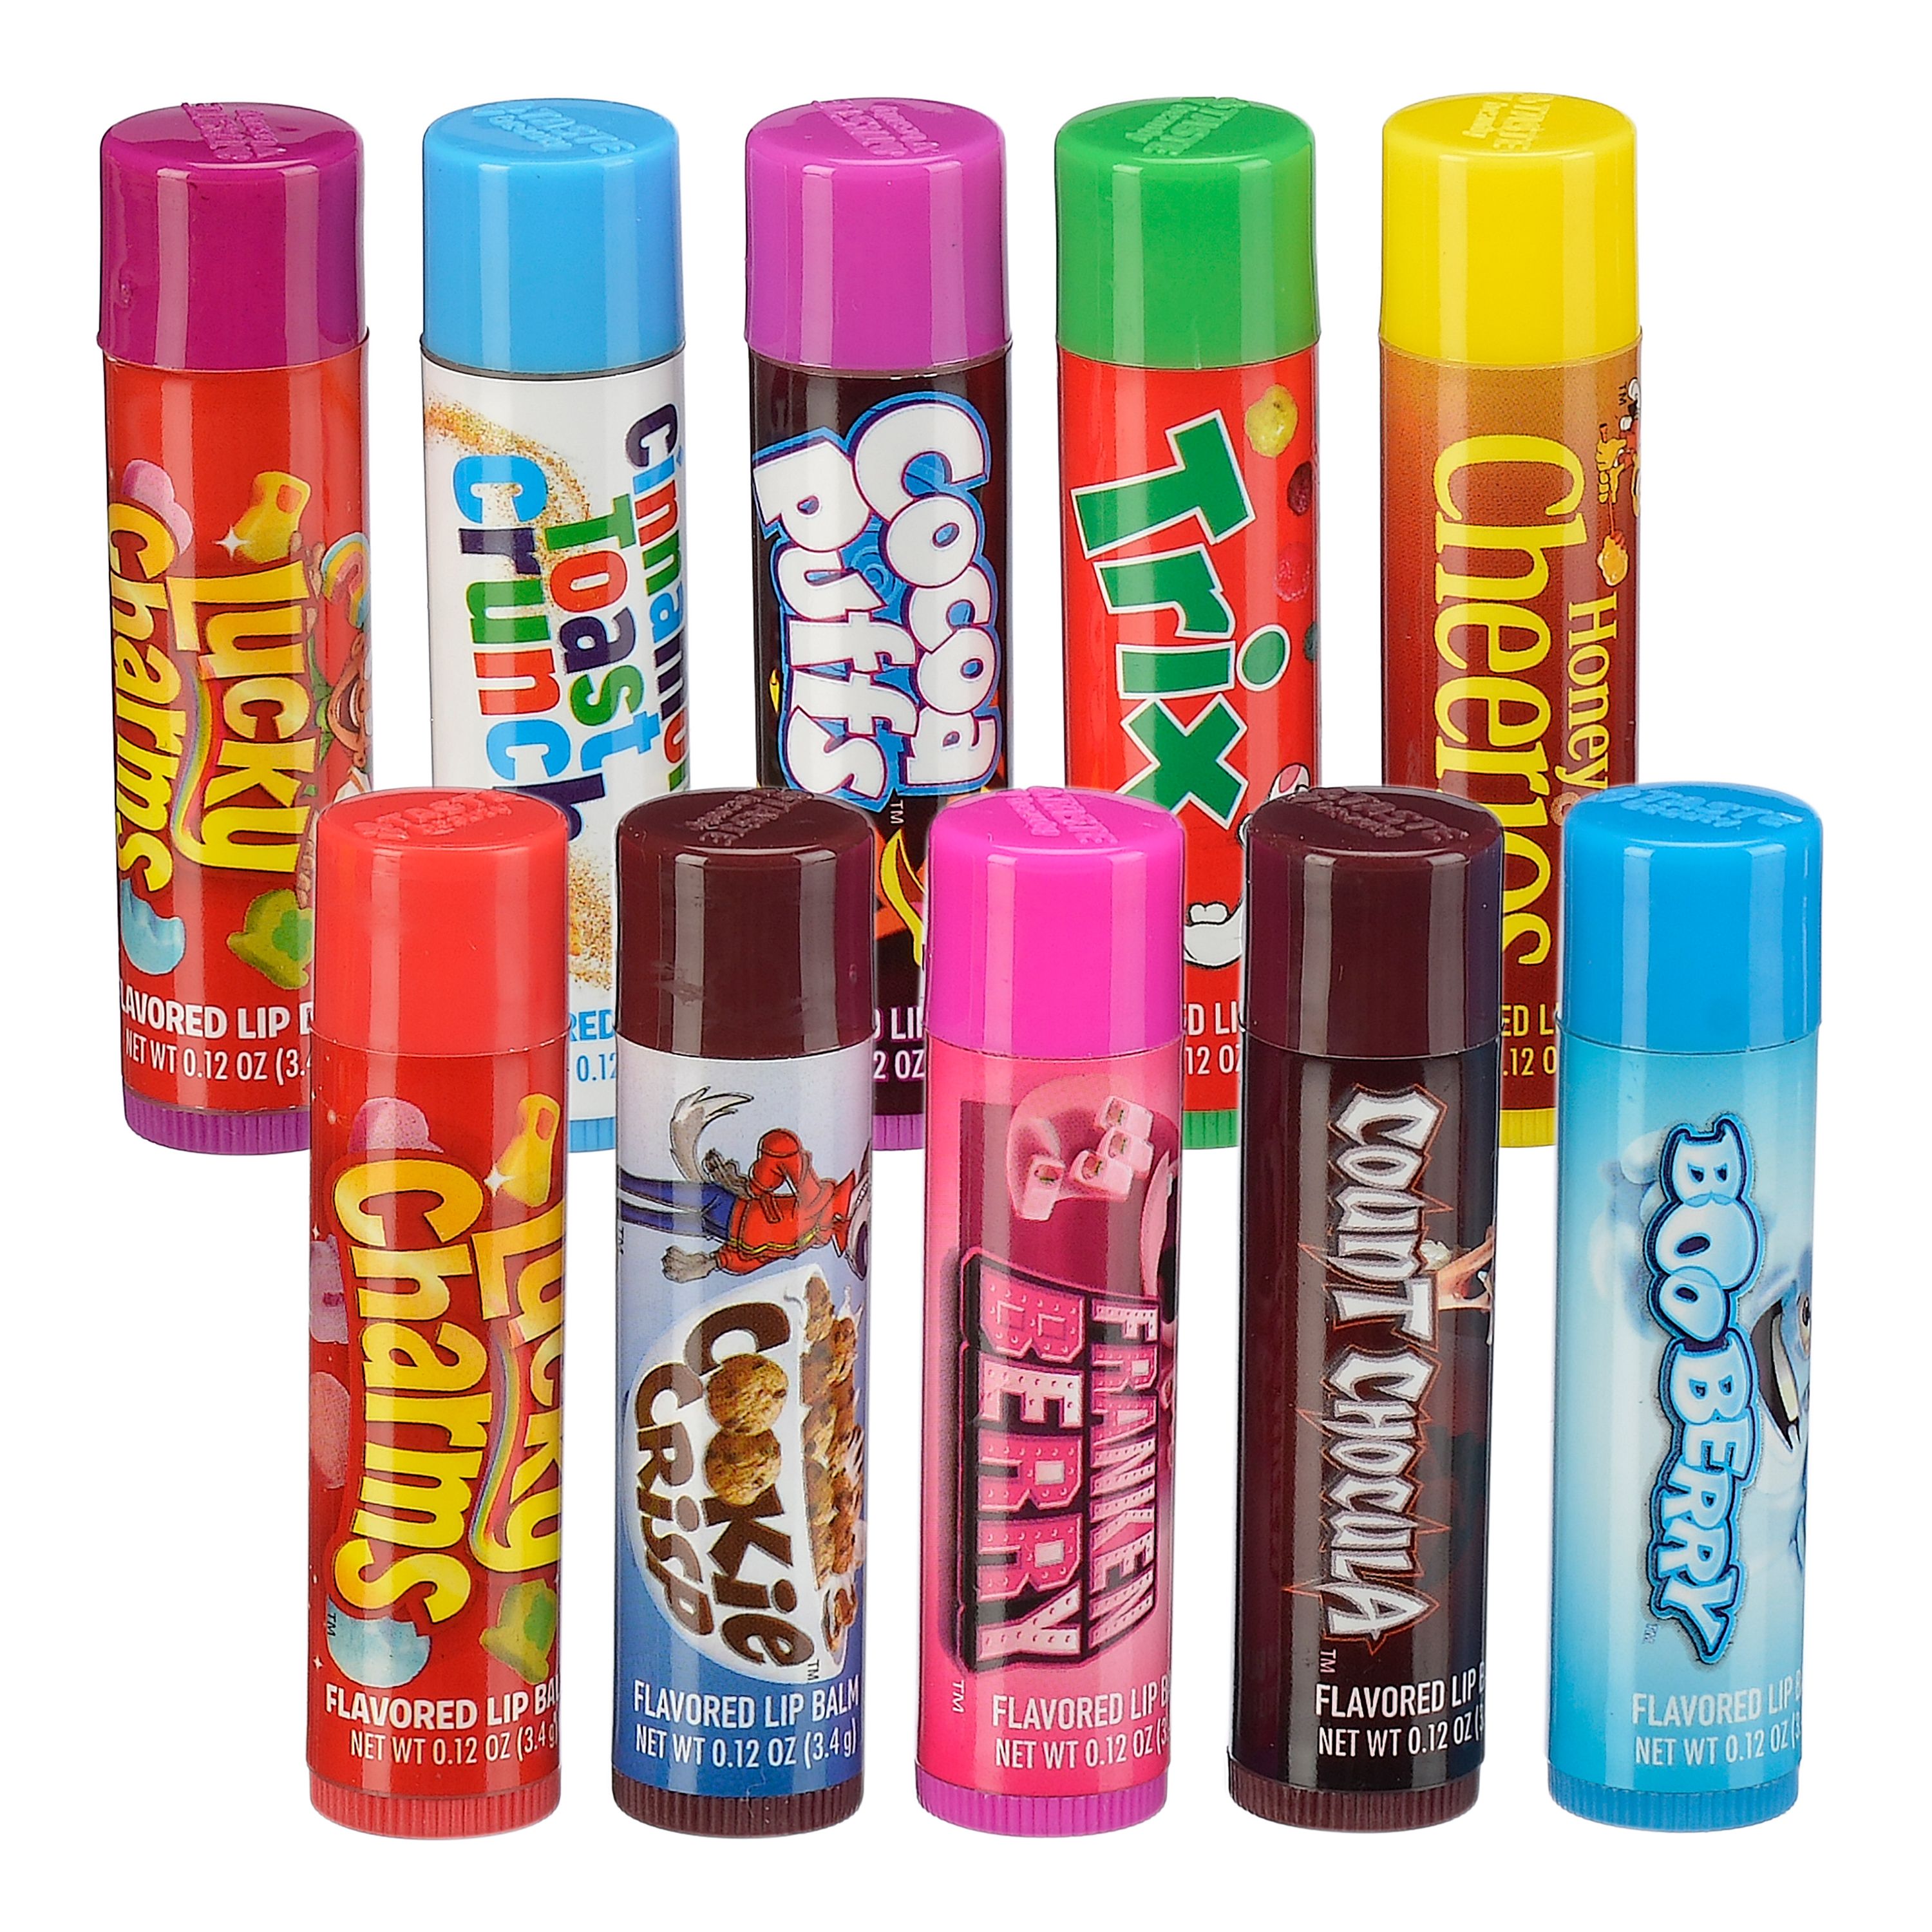 General Mills Breakfast Pack Cereal Flavored Lip Balm, 10 Pieces ($9.99 Value) - image 1 of 4